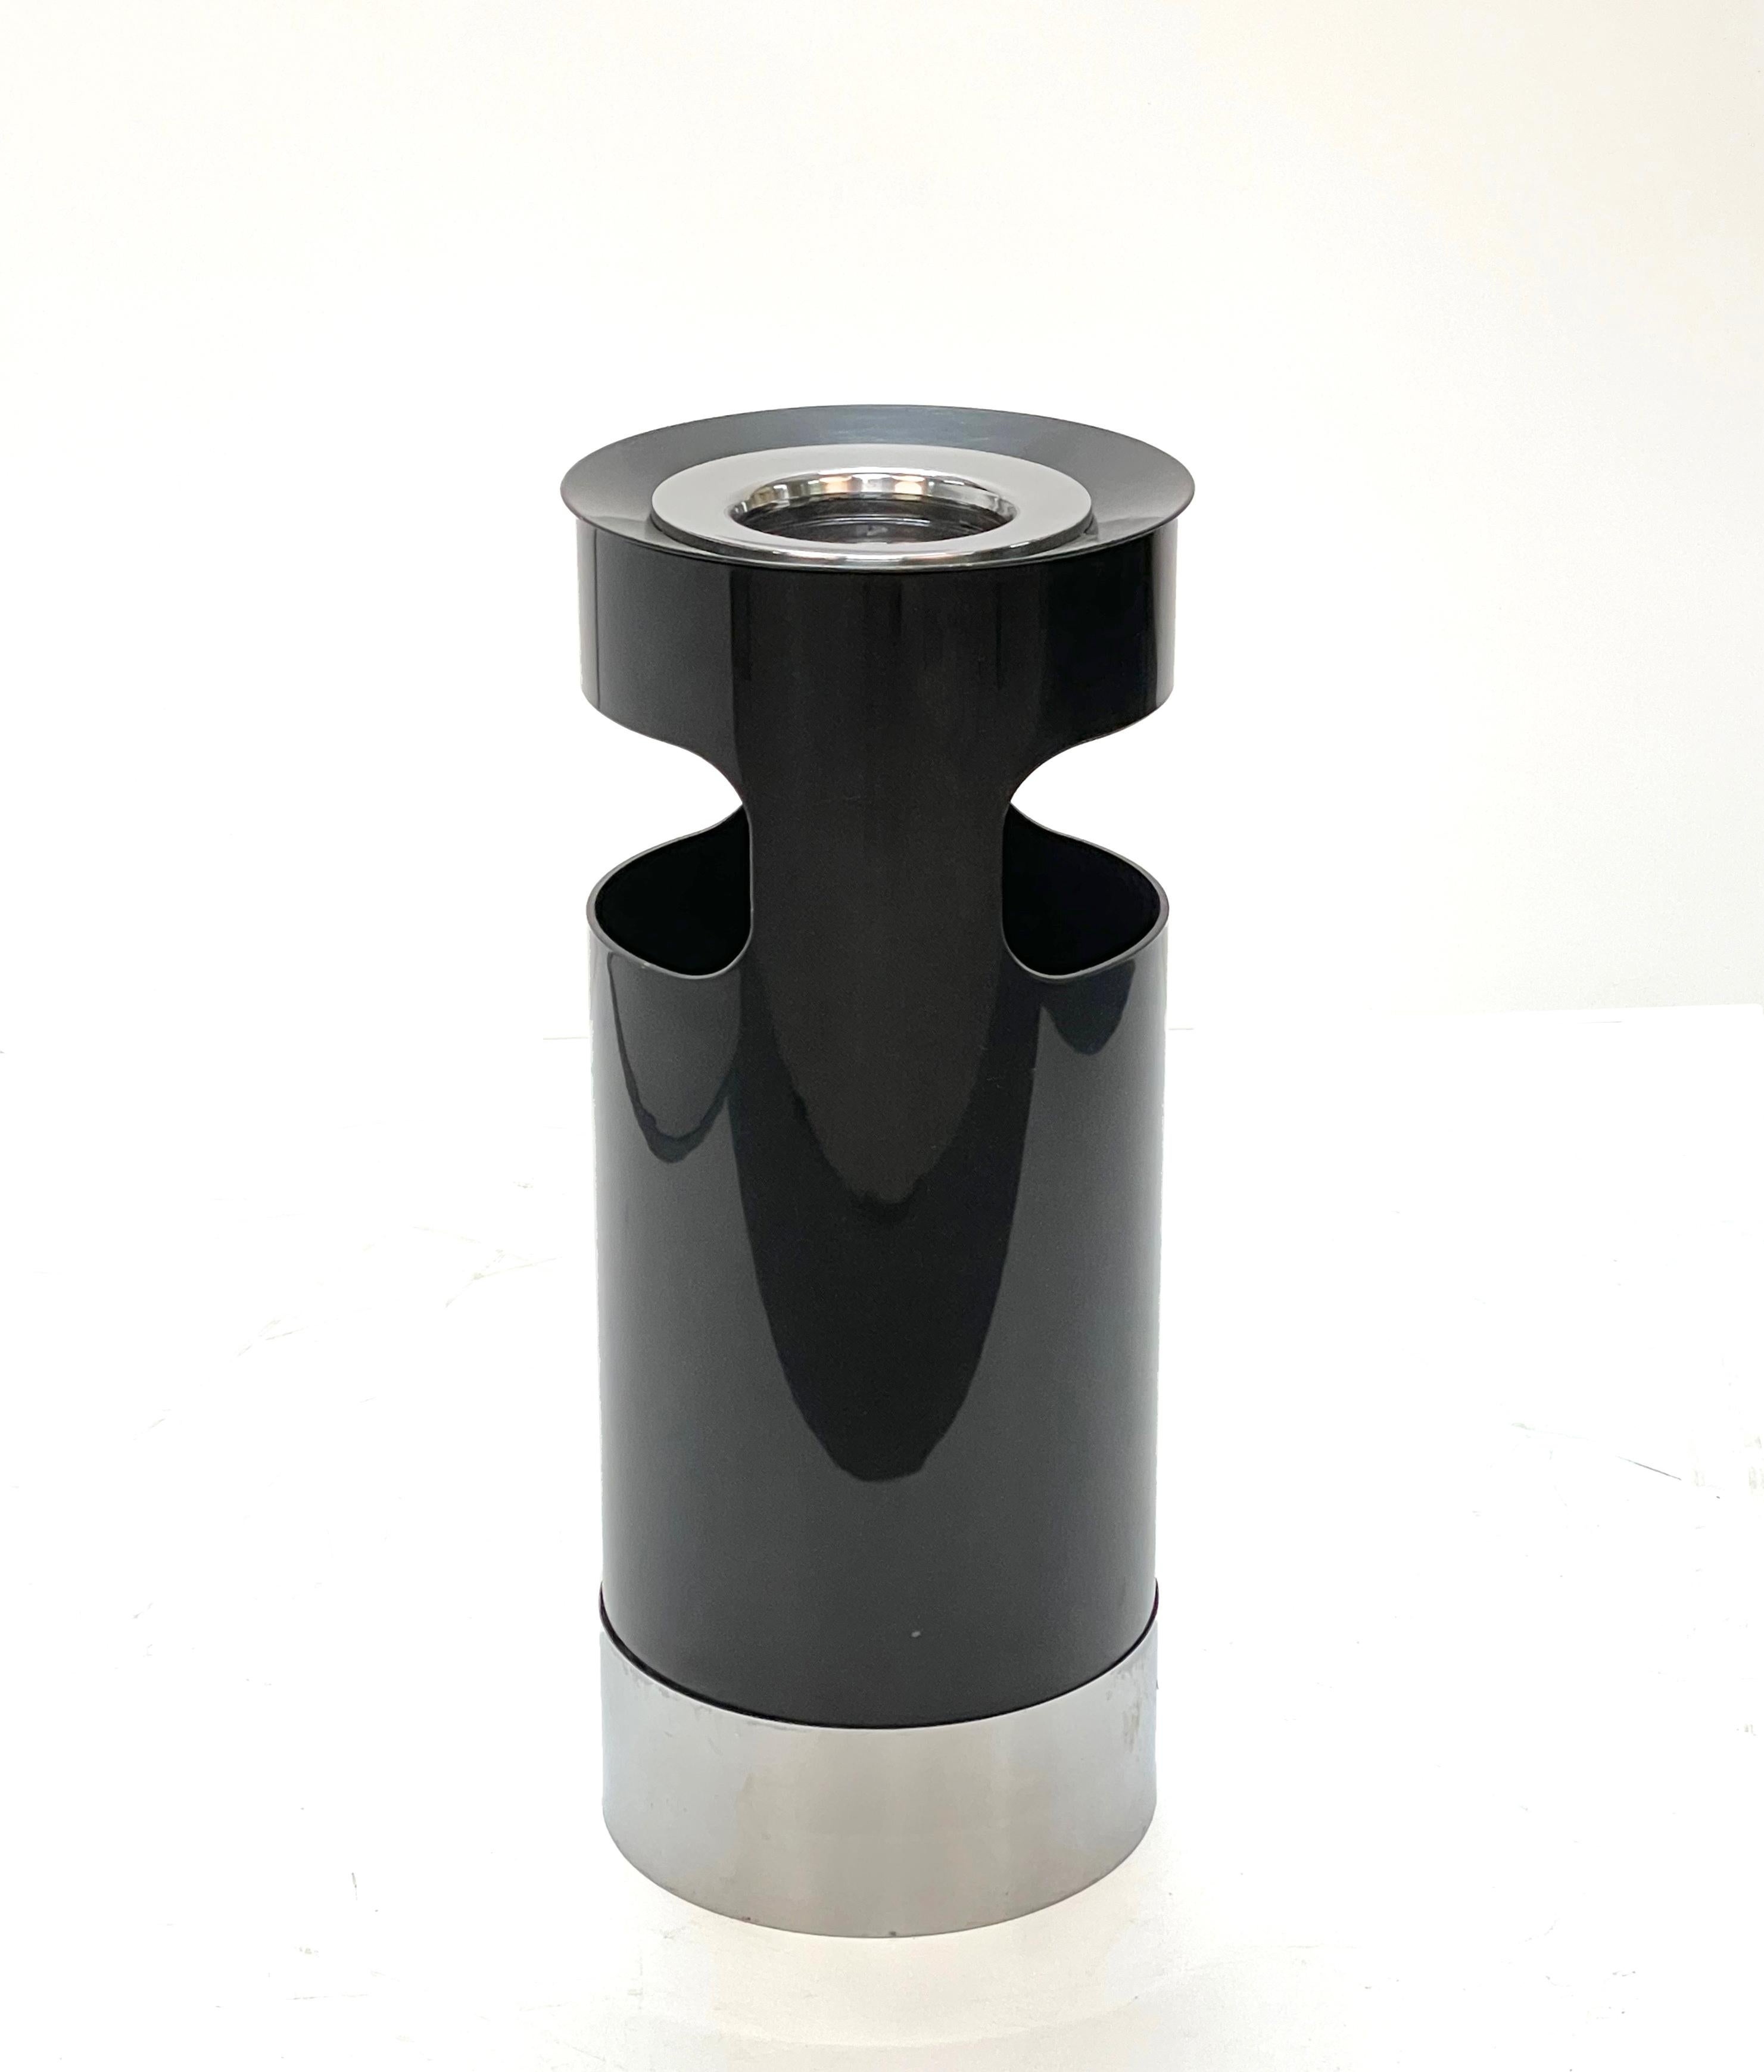 Amazing free standing ashtray or usable as an umbrella stand in mid-century black plastic with chromed metal rings. This fantastic piece was designed by Gino Colombini for Kartell in Italy in the 1970s.

This fantastic is perfect for a study and